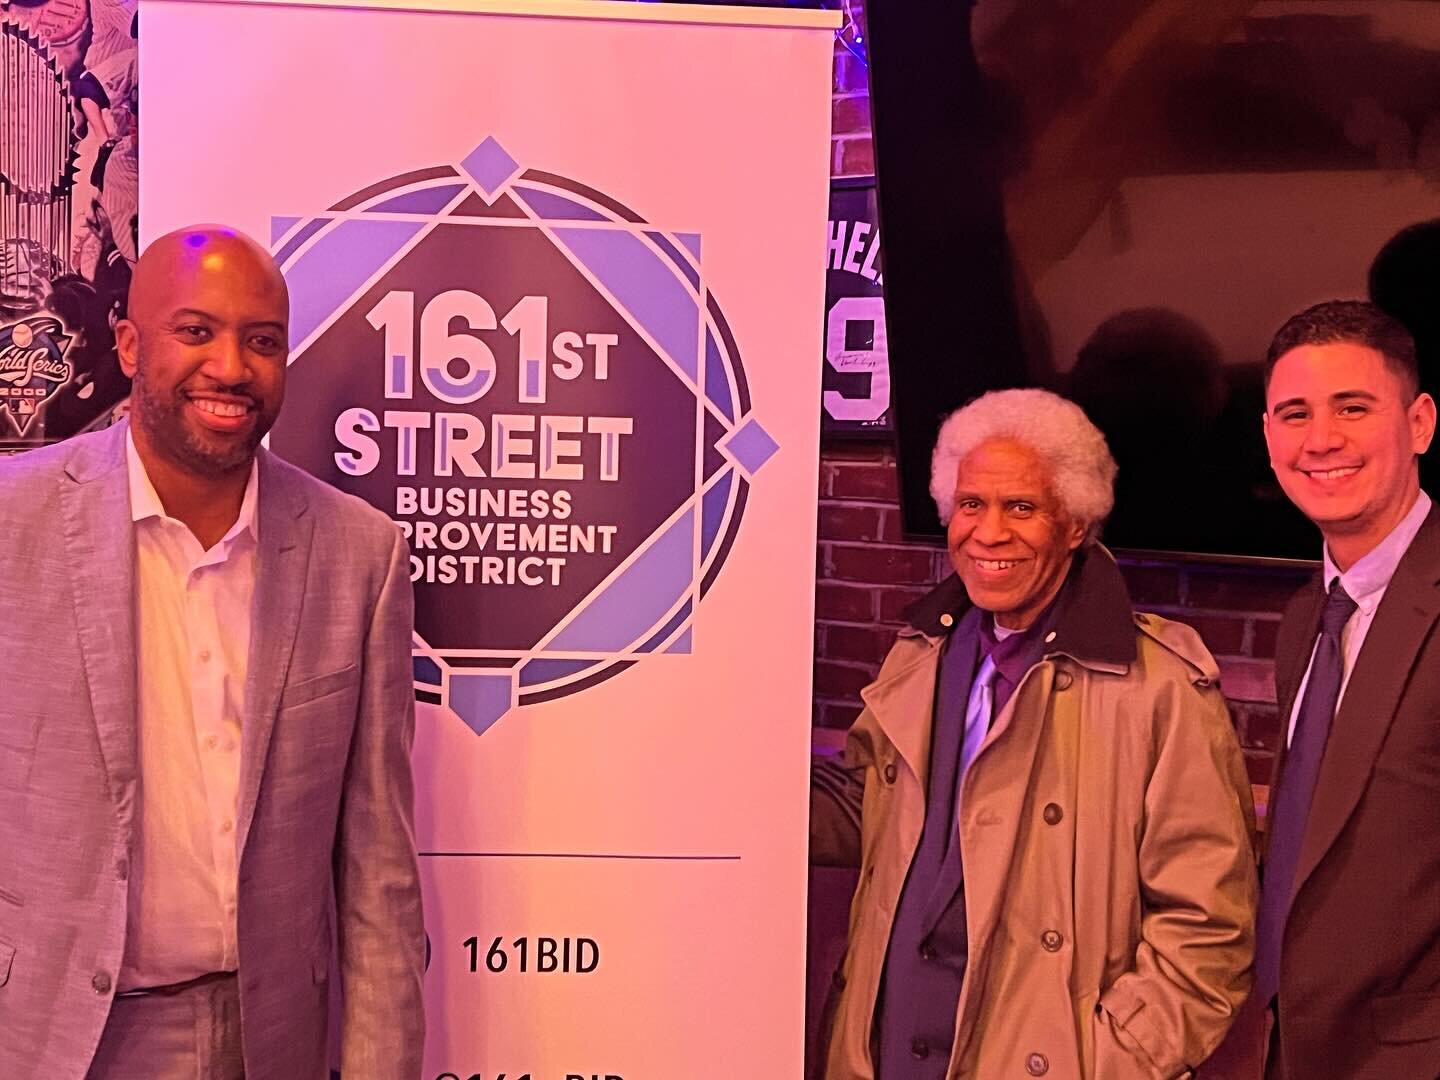 Our team. Yesterday we had our 14th annual meeting to celebrate the year our BID had and preview what&rsquo;s in store for 2024. Thanks to all that came out and thank you @bronxbpgibson for speaking to our stakeholders. Here&rsquo;s a video recap of 